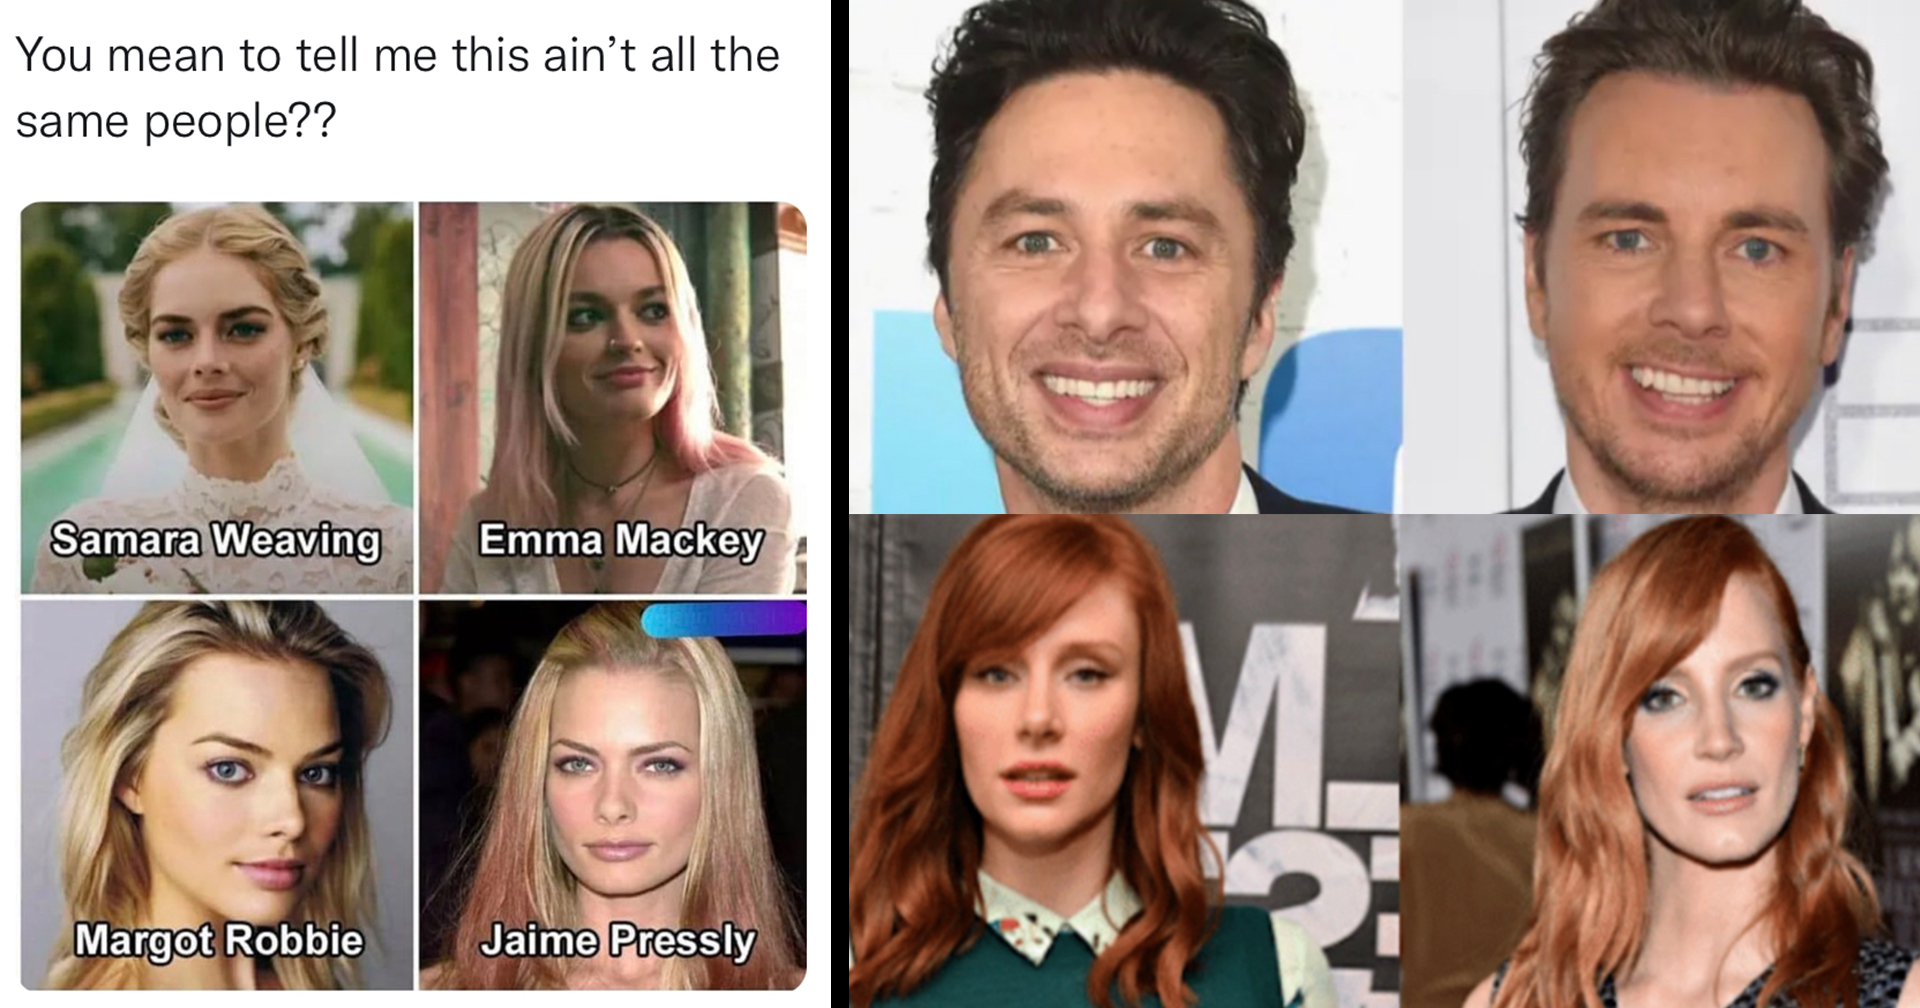 Surreal Thread Points Out Celebrities That Look Uncannily Alike